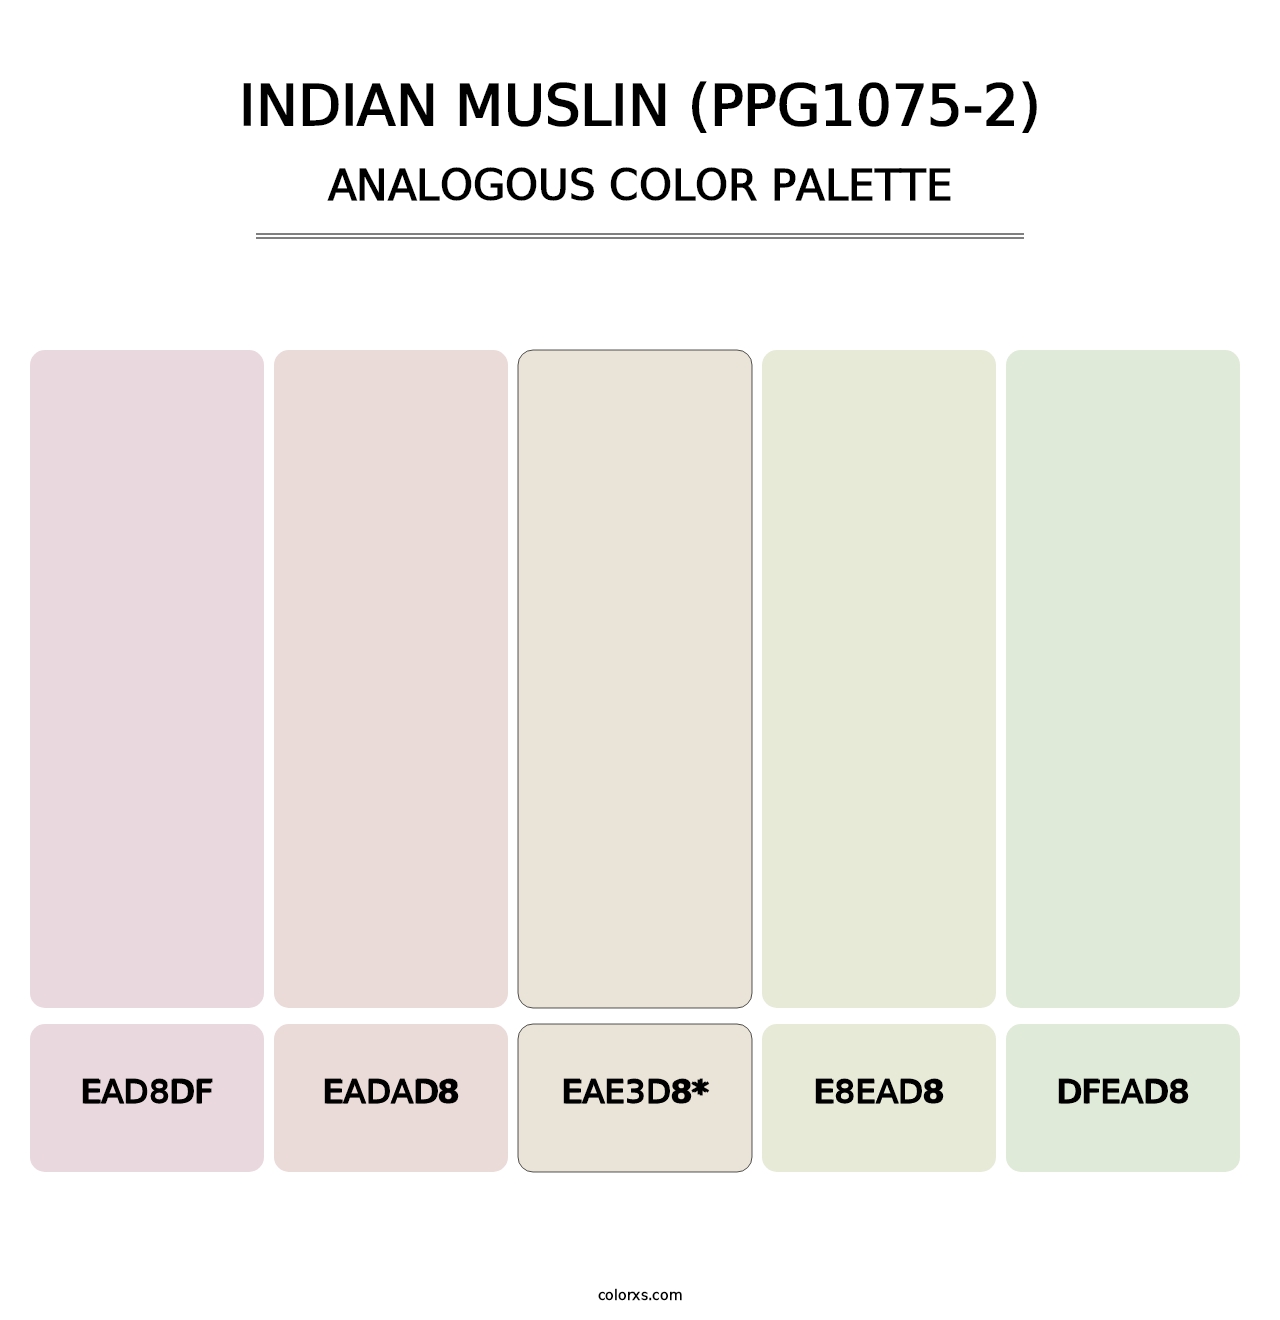 Indian Muslin (PPG1075-2) - Analogous Color Palette